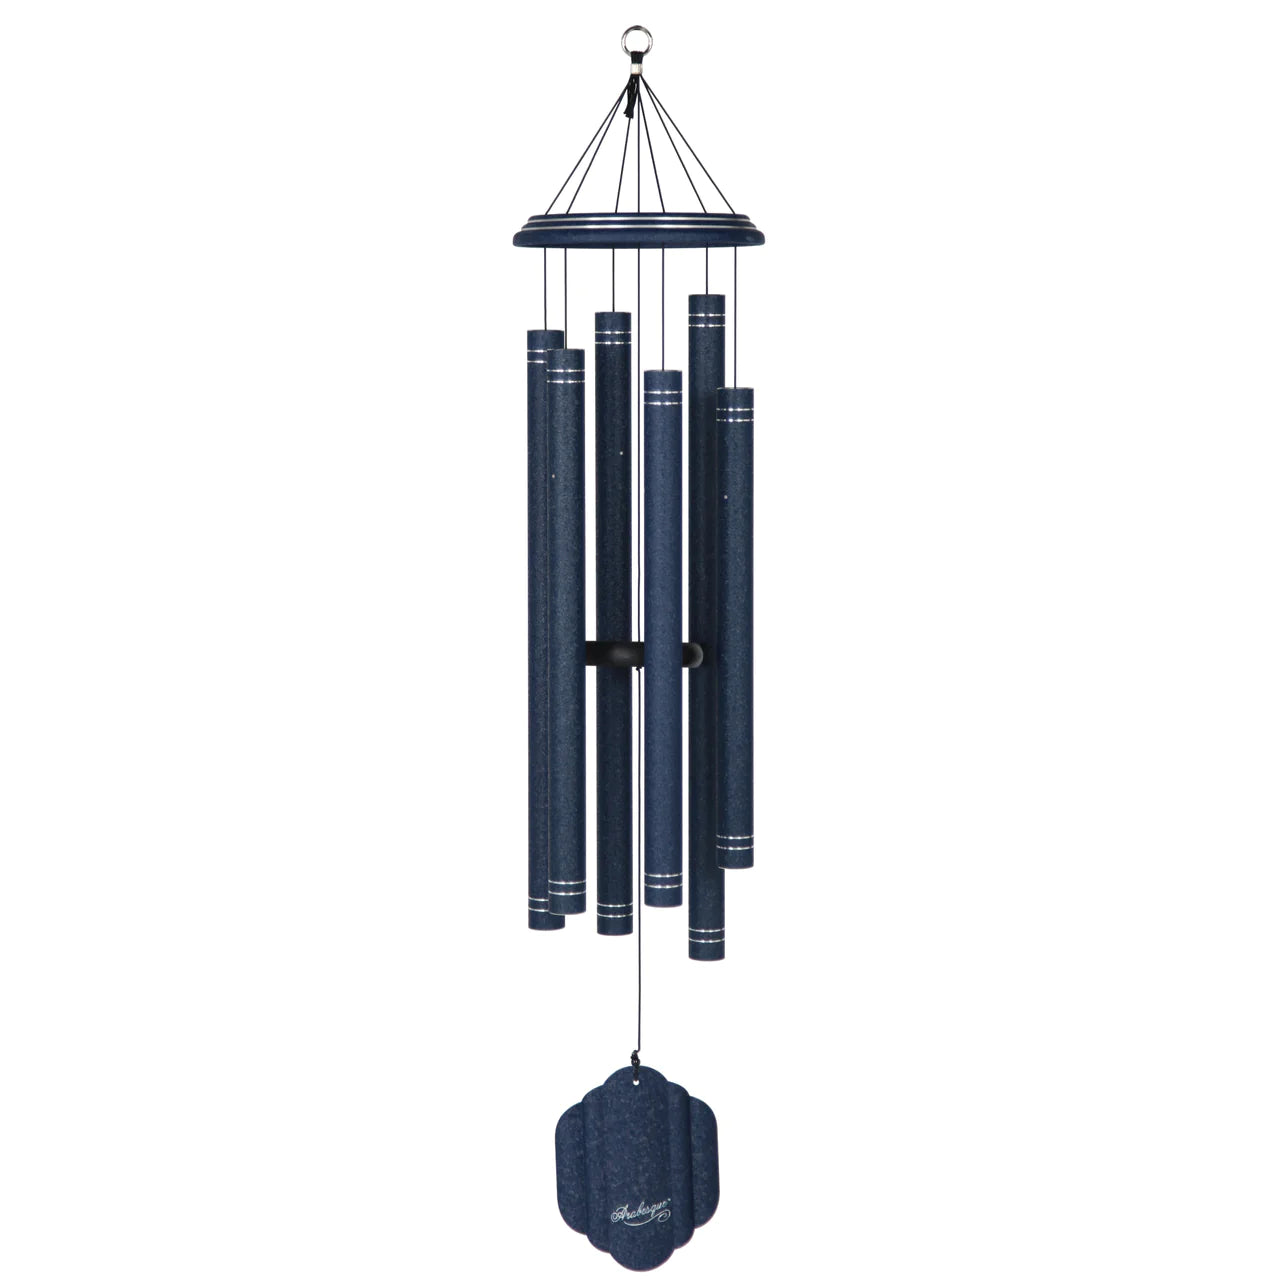 Arabesque® by Wind River Windchime